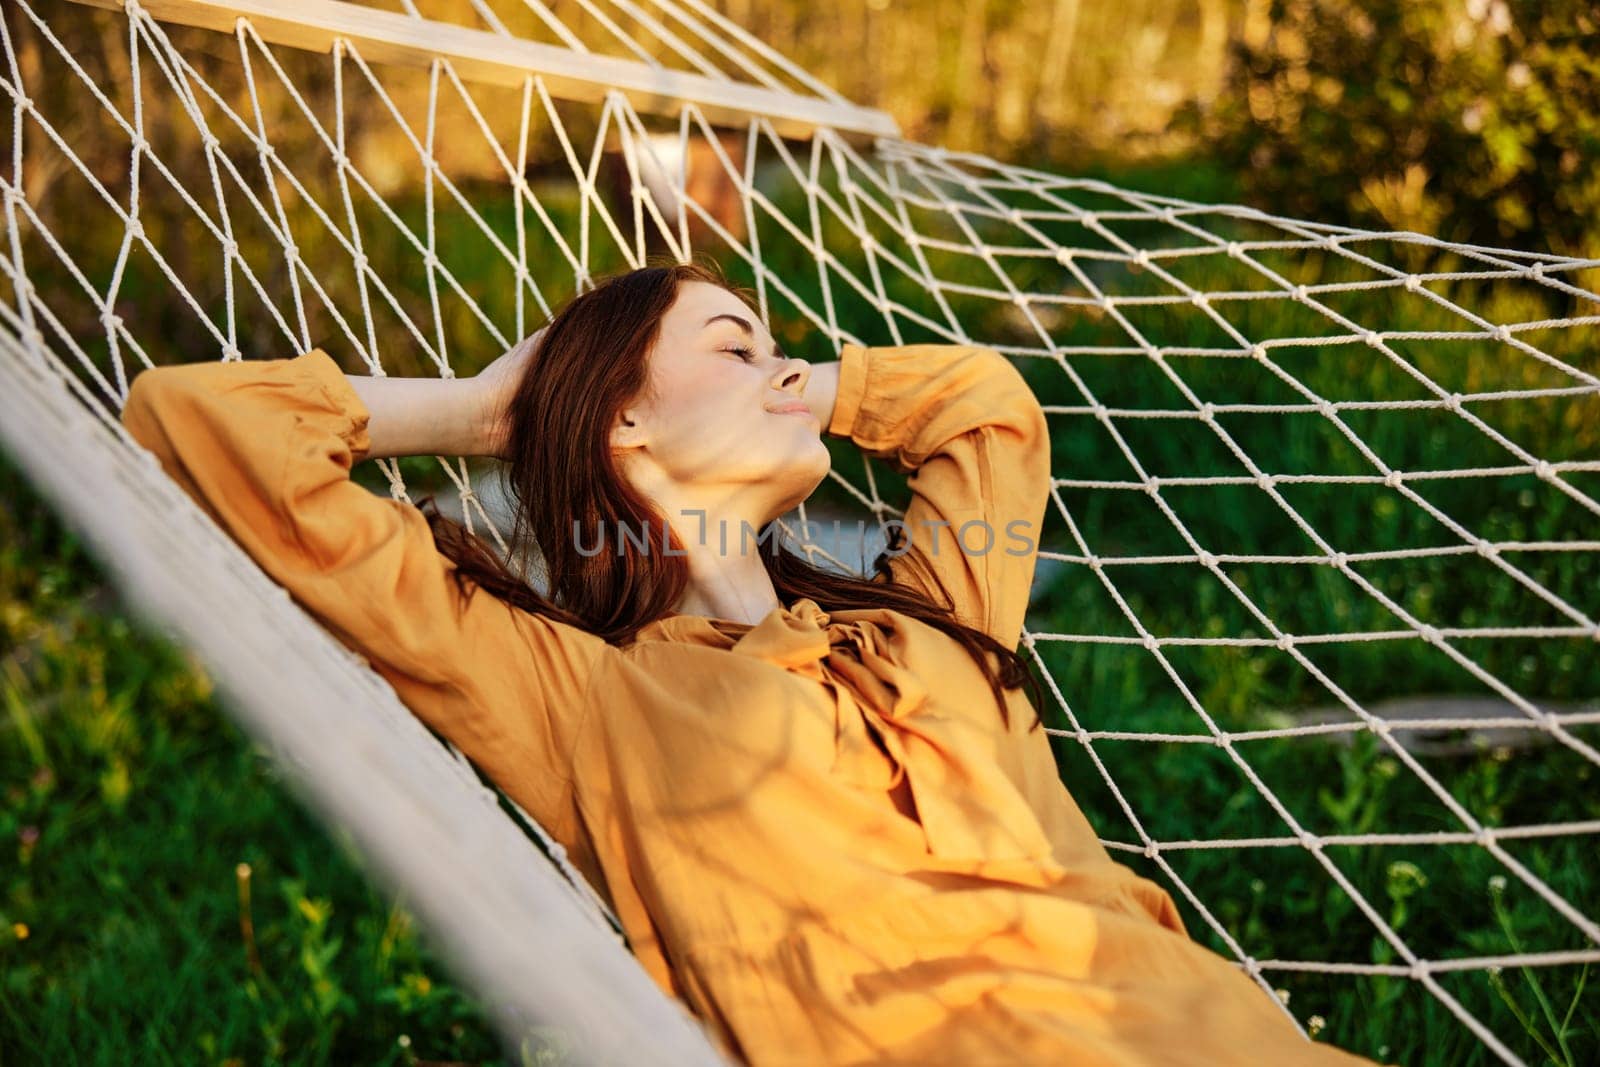 a happy woman is resting in a hammock with her eyes closed and her hands behind her head smiling happily enjoying the day. High quality photo